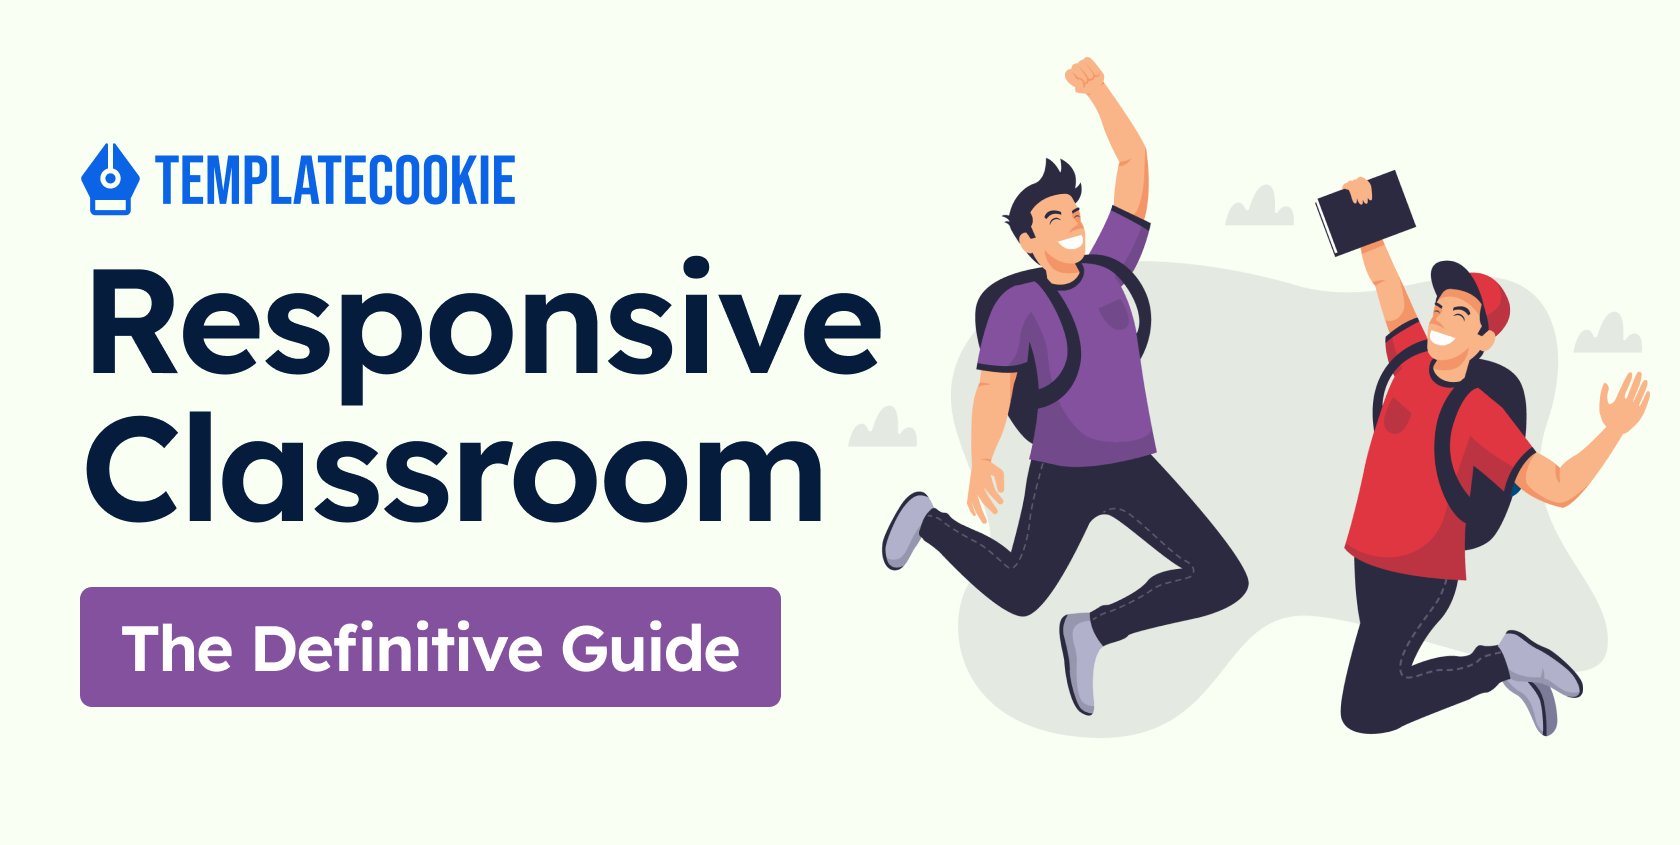 Responsive Classroom - The Definitive Guide